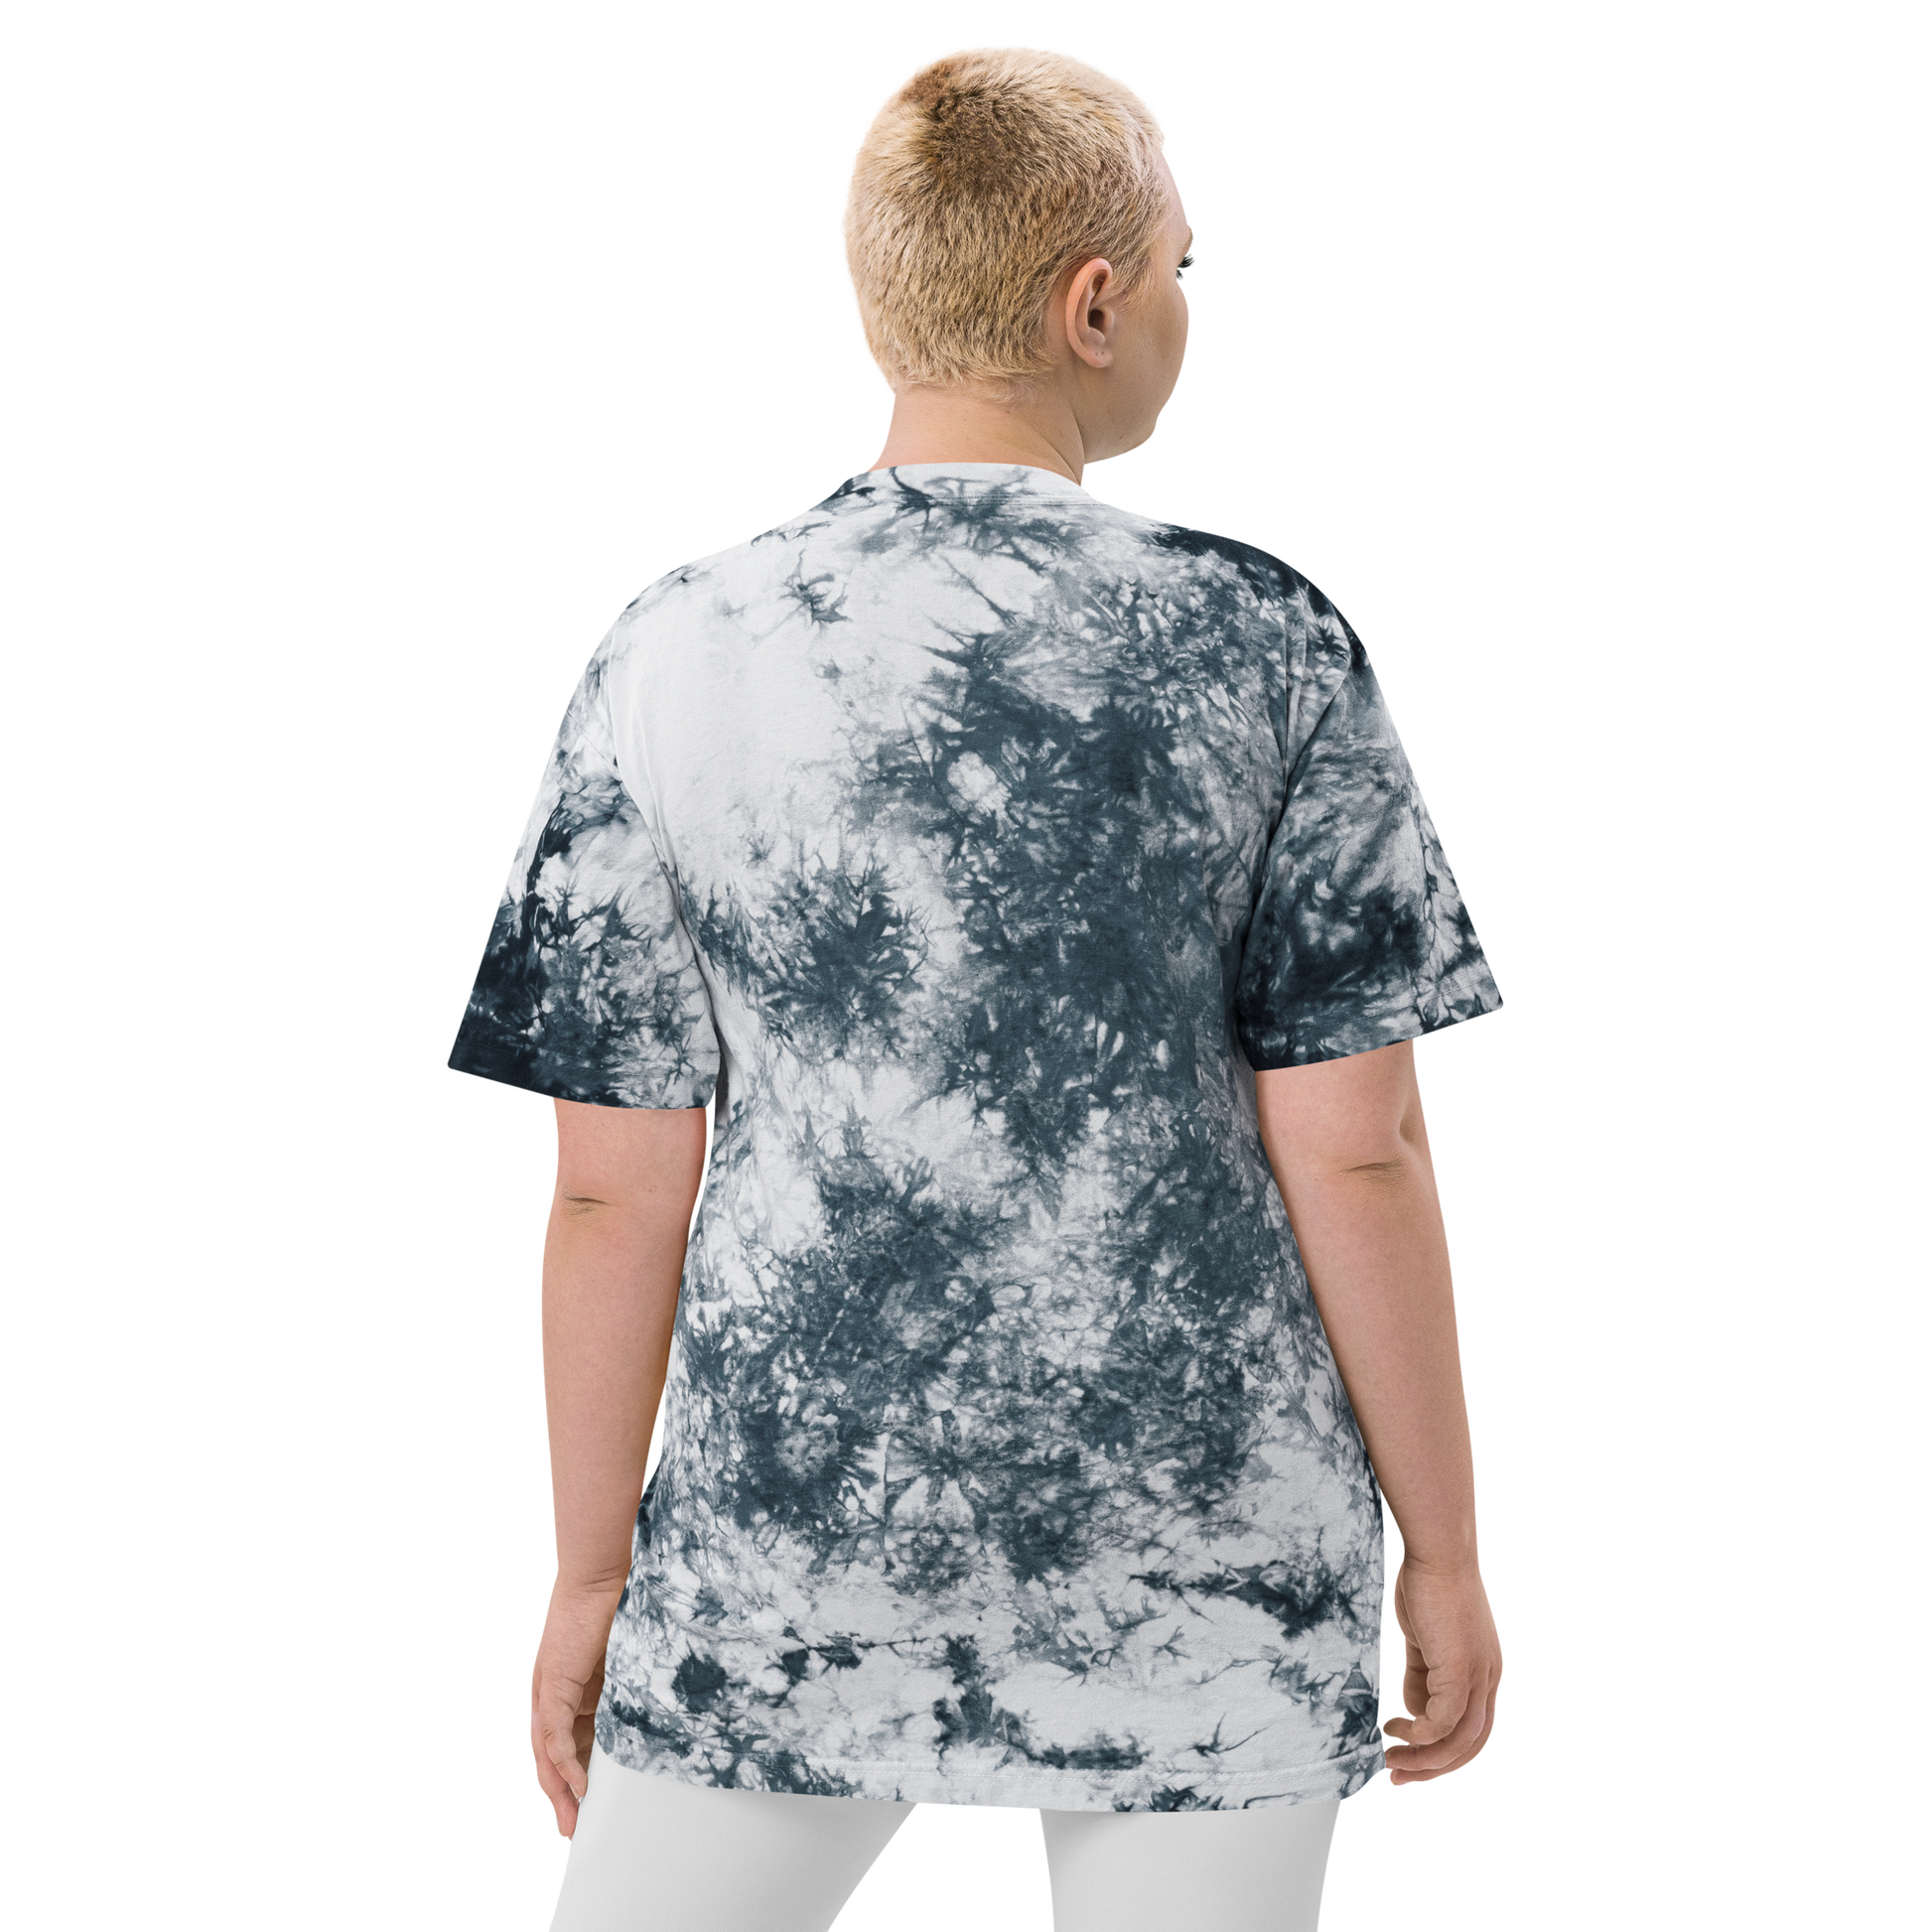 YHM Designs - YFB Iqaluit Oversized Tie-Dye T-Shirt - Crossed-X Design with Airport Code and Vintage Propliner - White Embroidery - Image 17